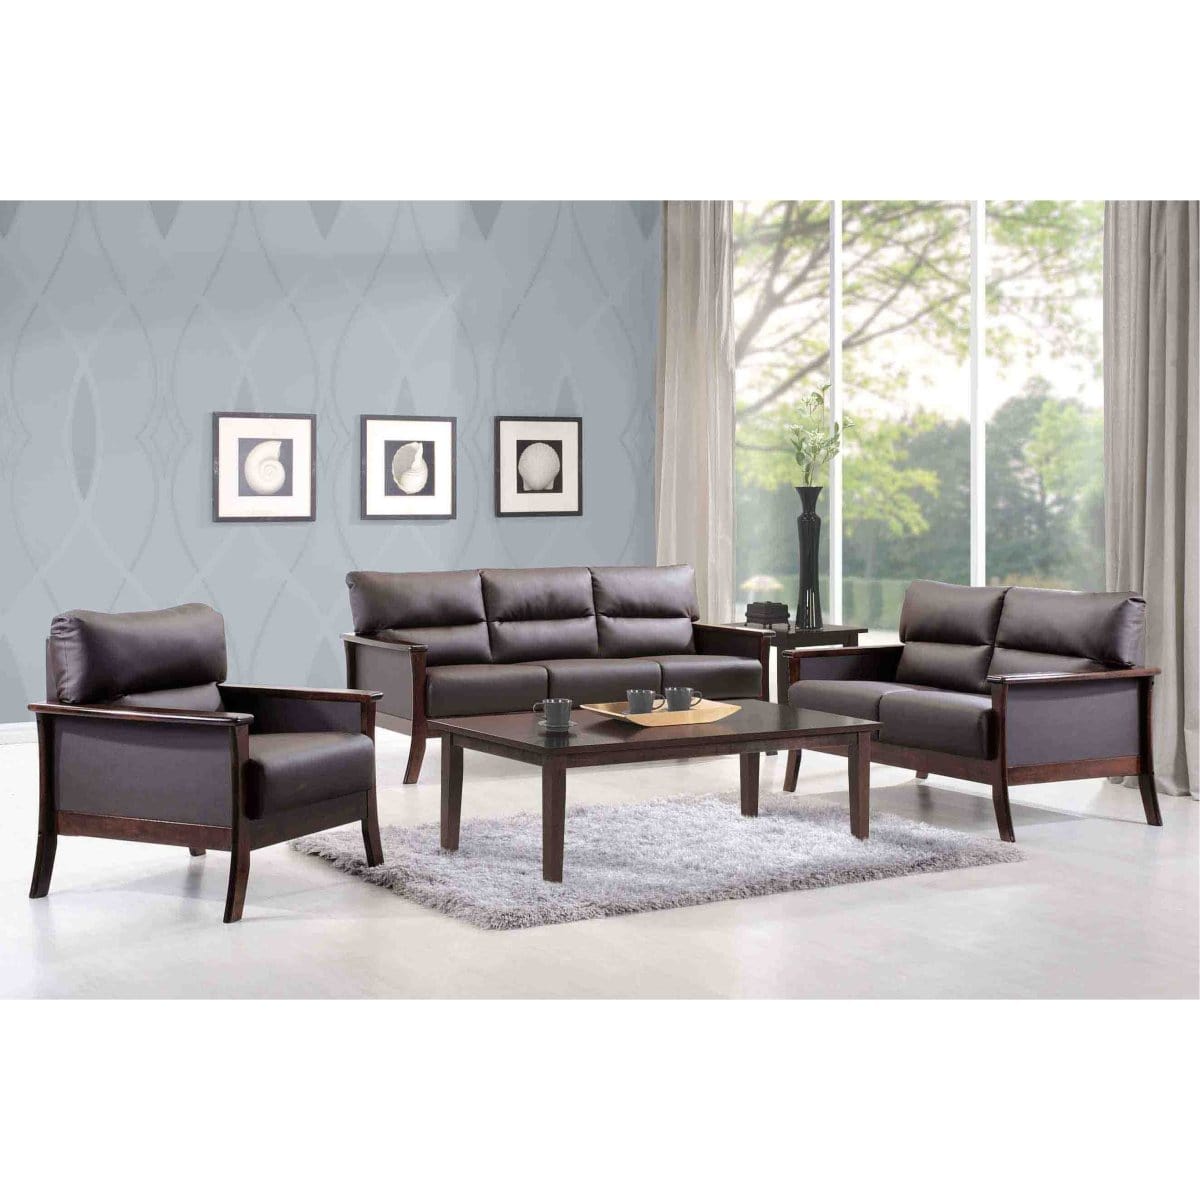 Davis 1-Seater Solid Wood Frame Leather-Upholstered Sofa picket and rail